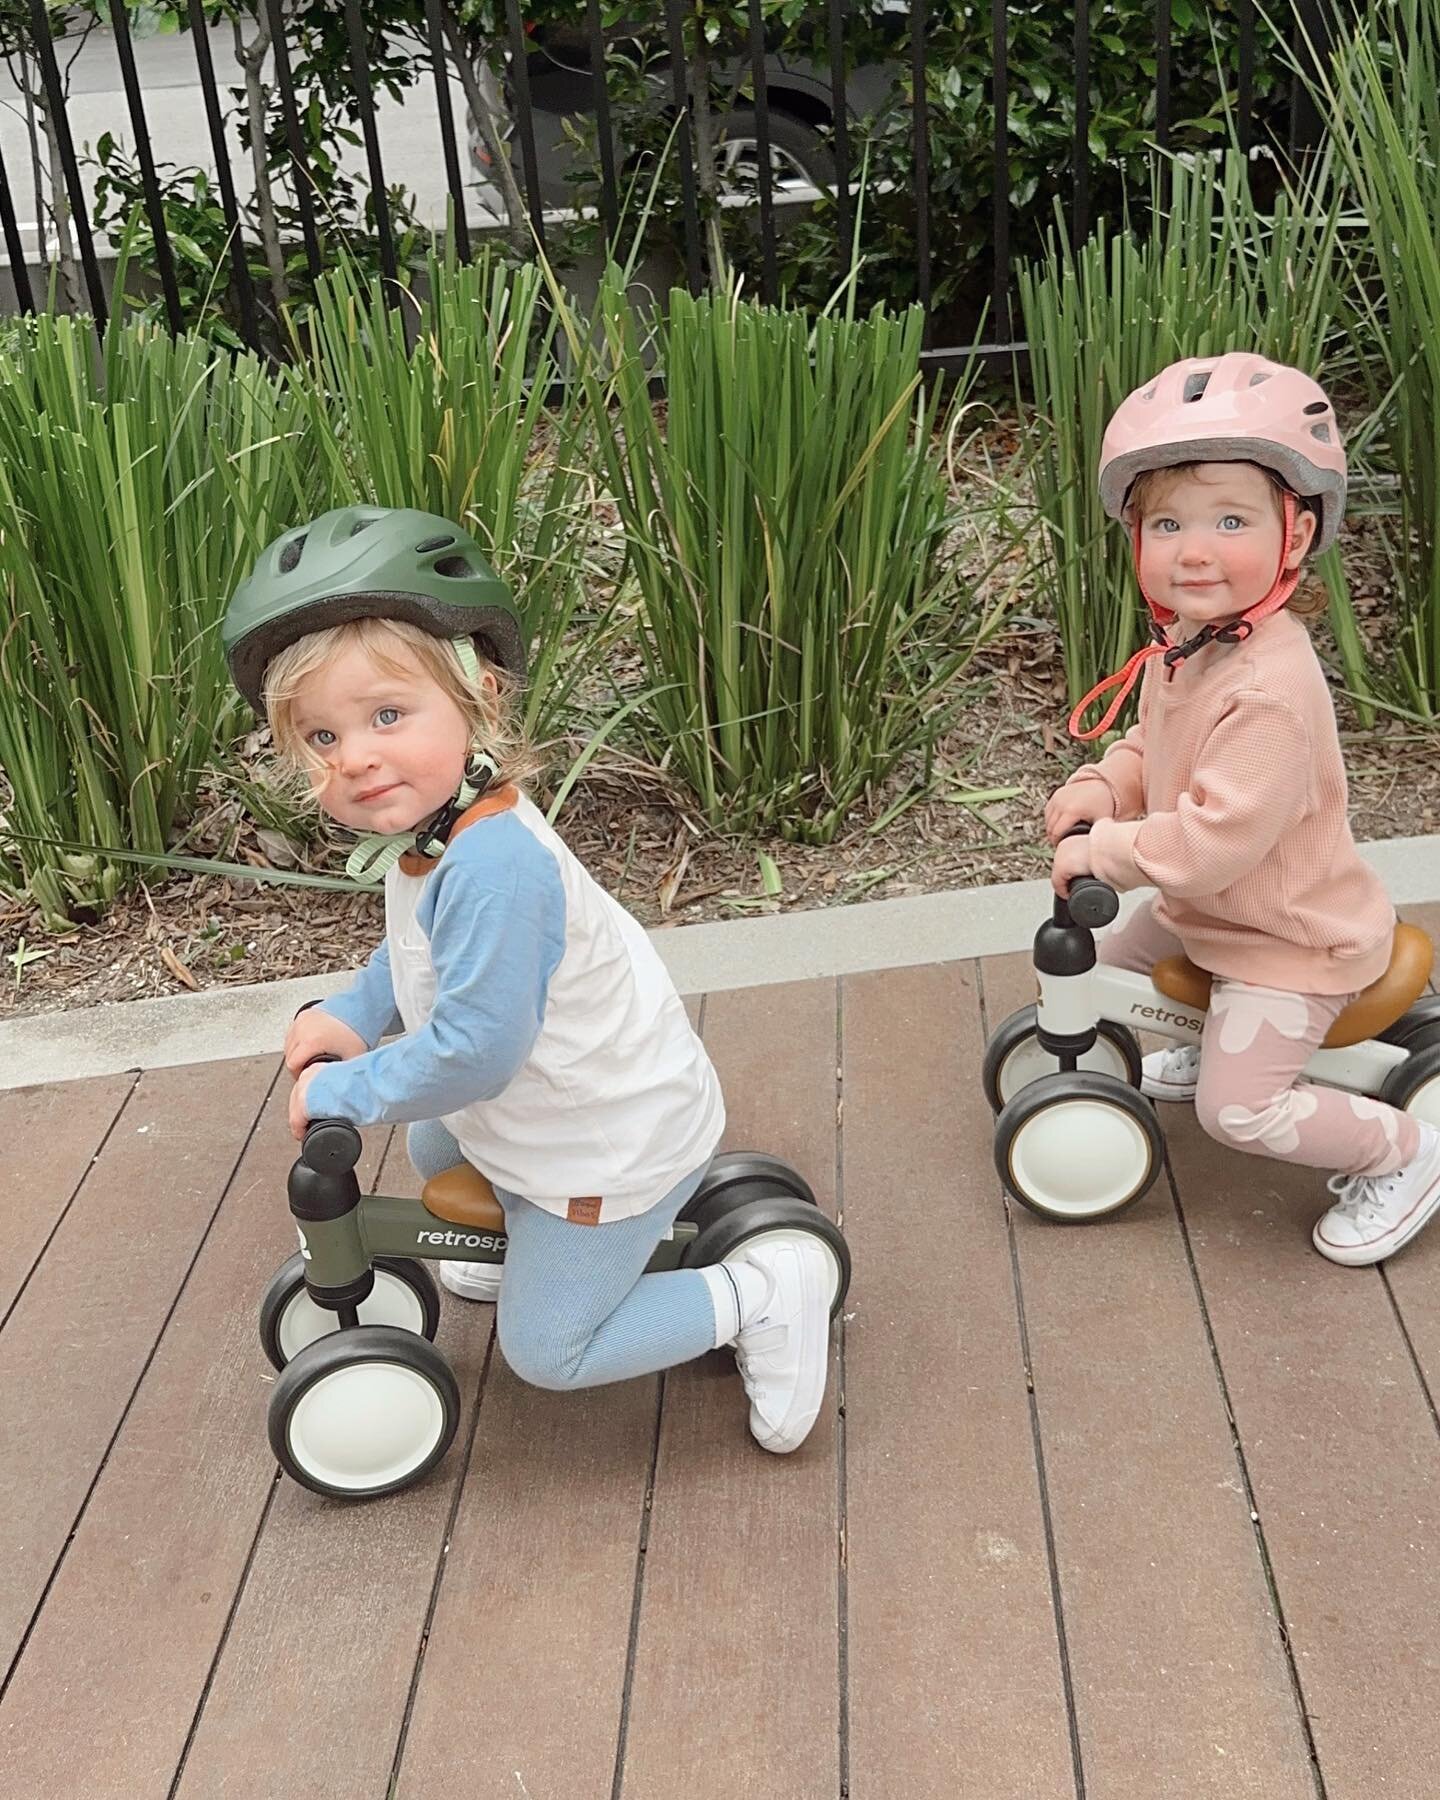 Safety first!! Fun second 😉
.
Side note, we&rsquo;ve almost outgrown our balance  bikes and need to upgrade. Any favorites out there?